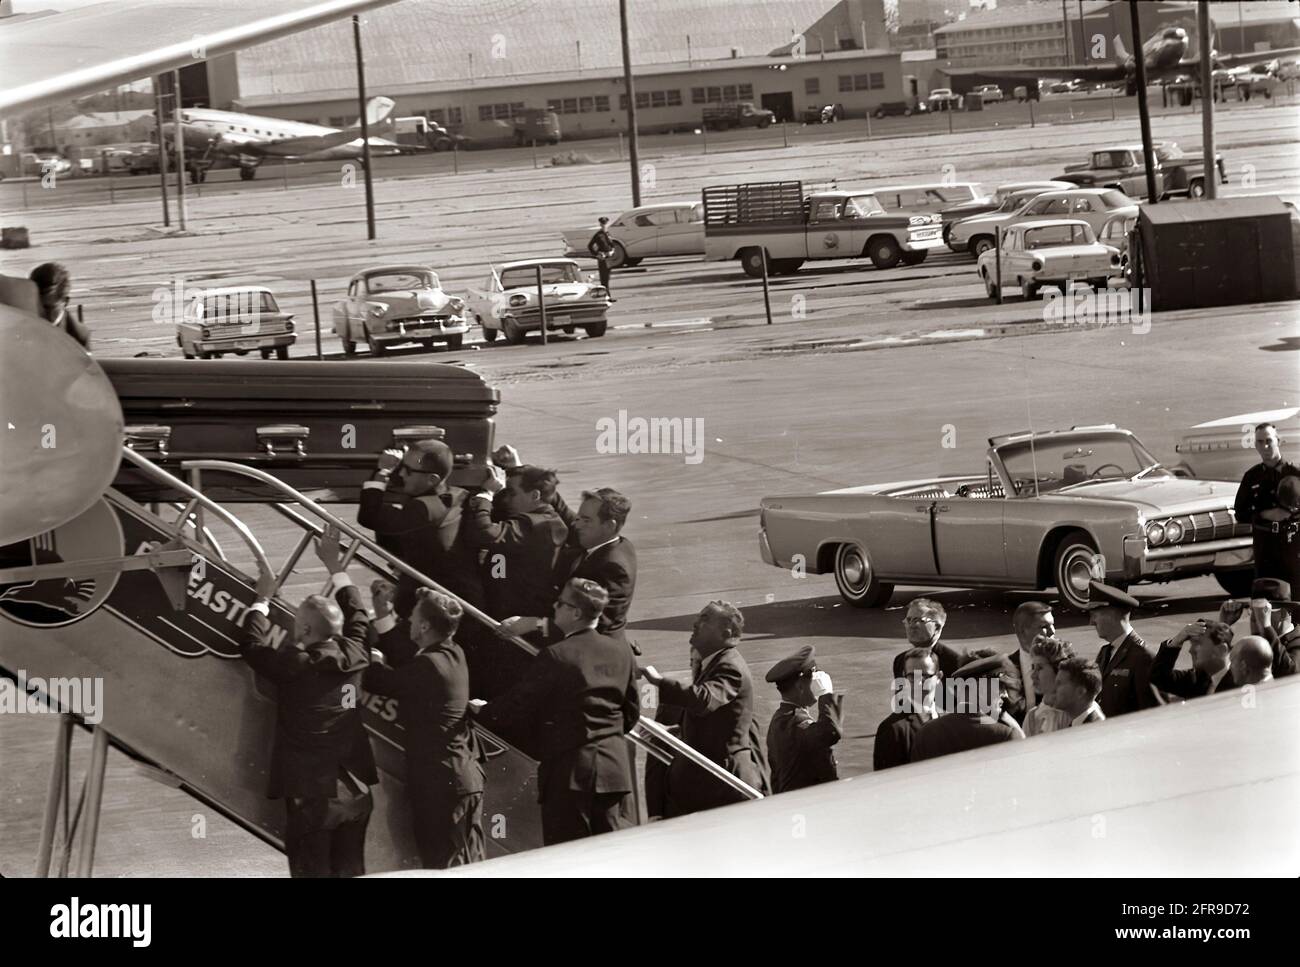 Jfk Assassination High Resolution Stock Photography and Images - Alamy